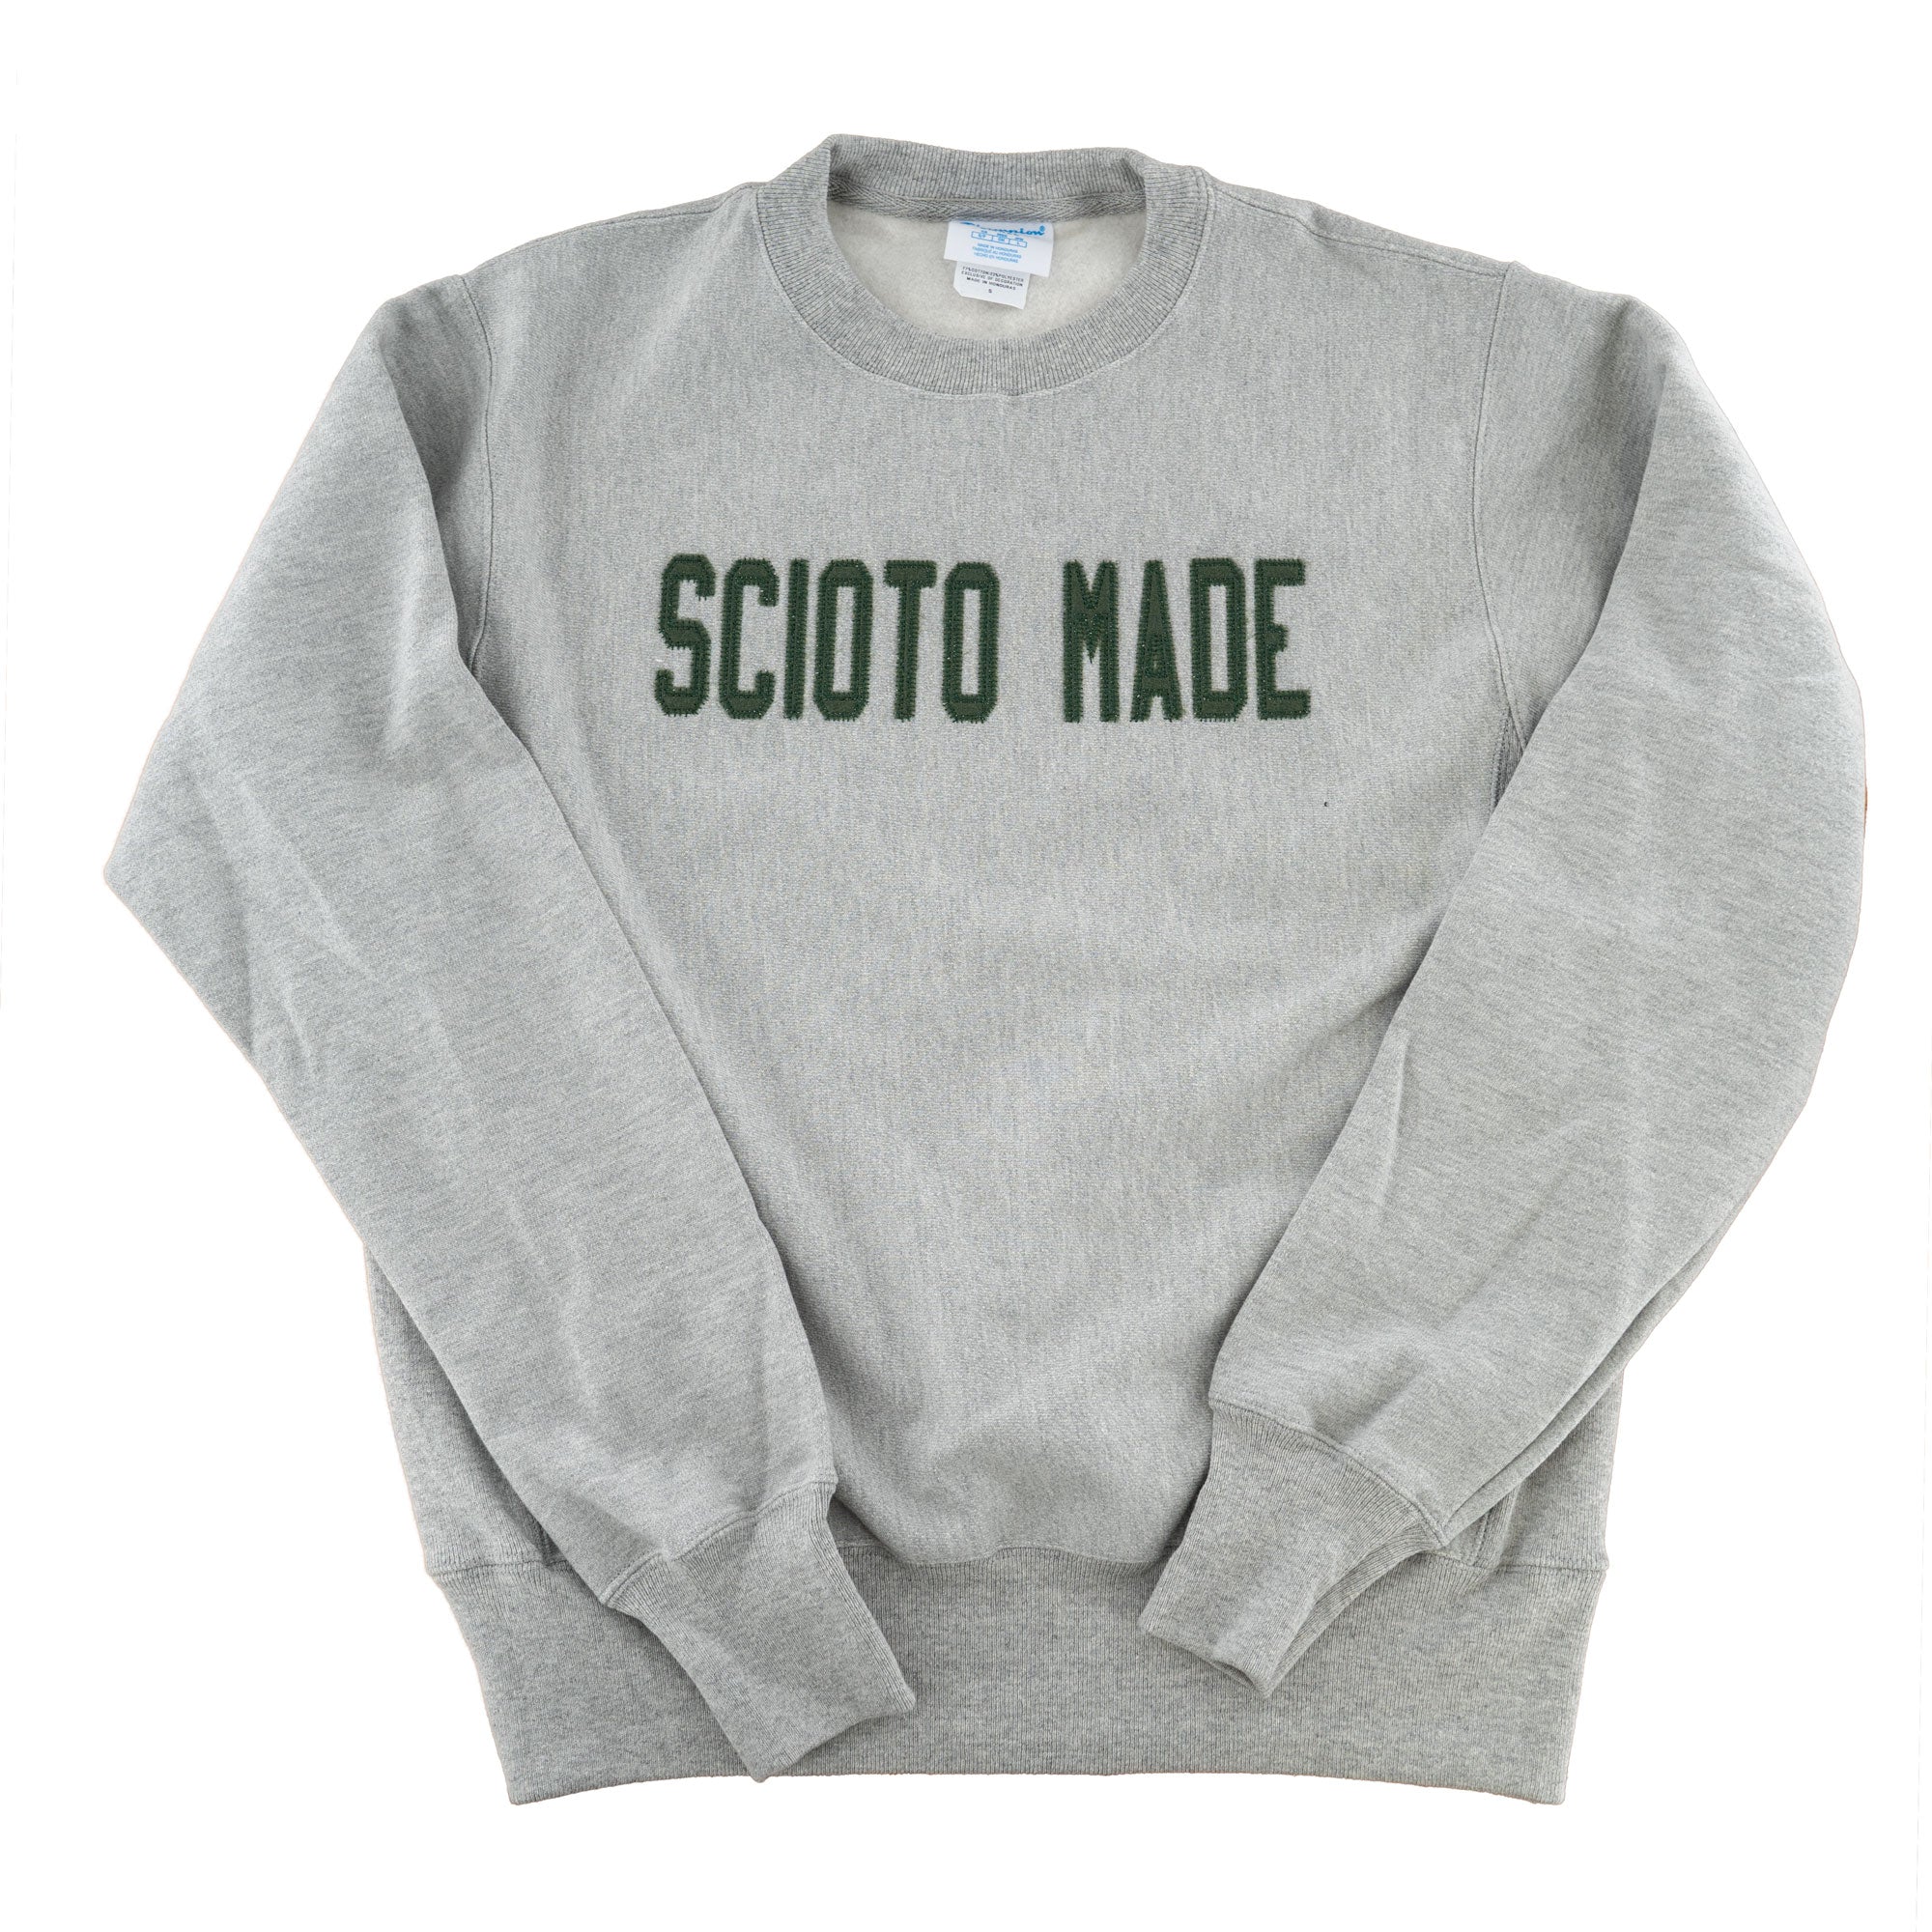 Scioto Made Varsity Sweatshirt in oxford gray with green felt letters sewn on. 